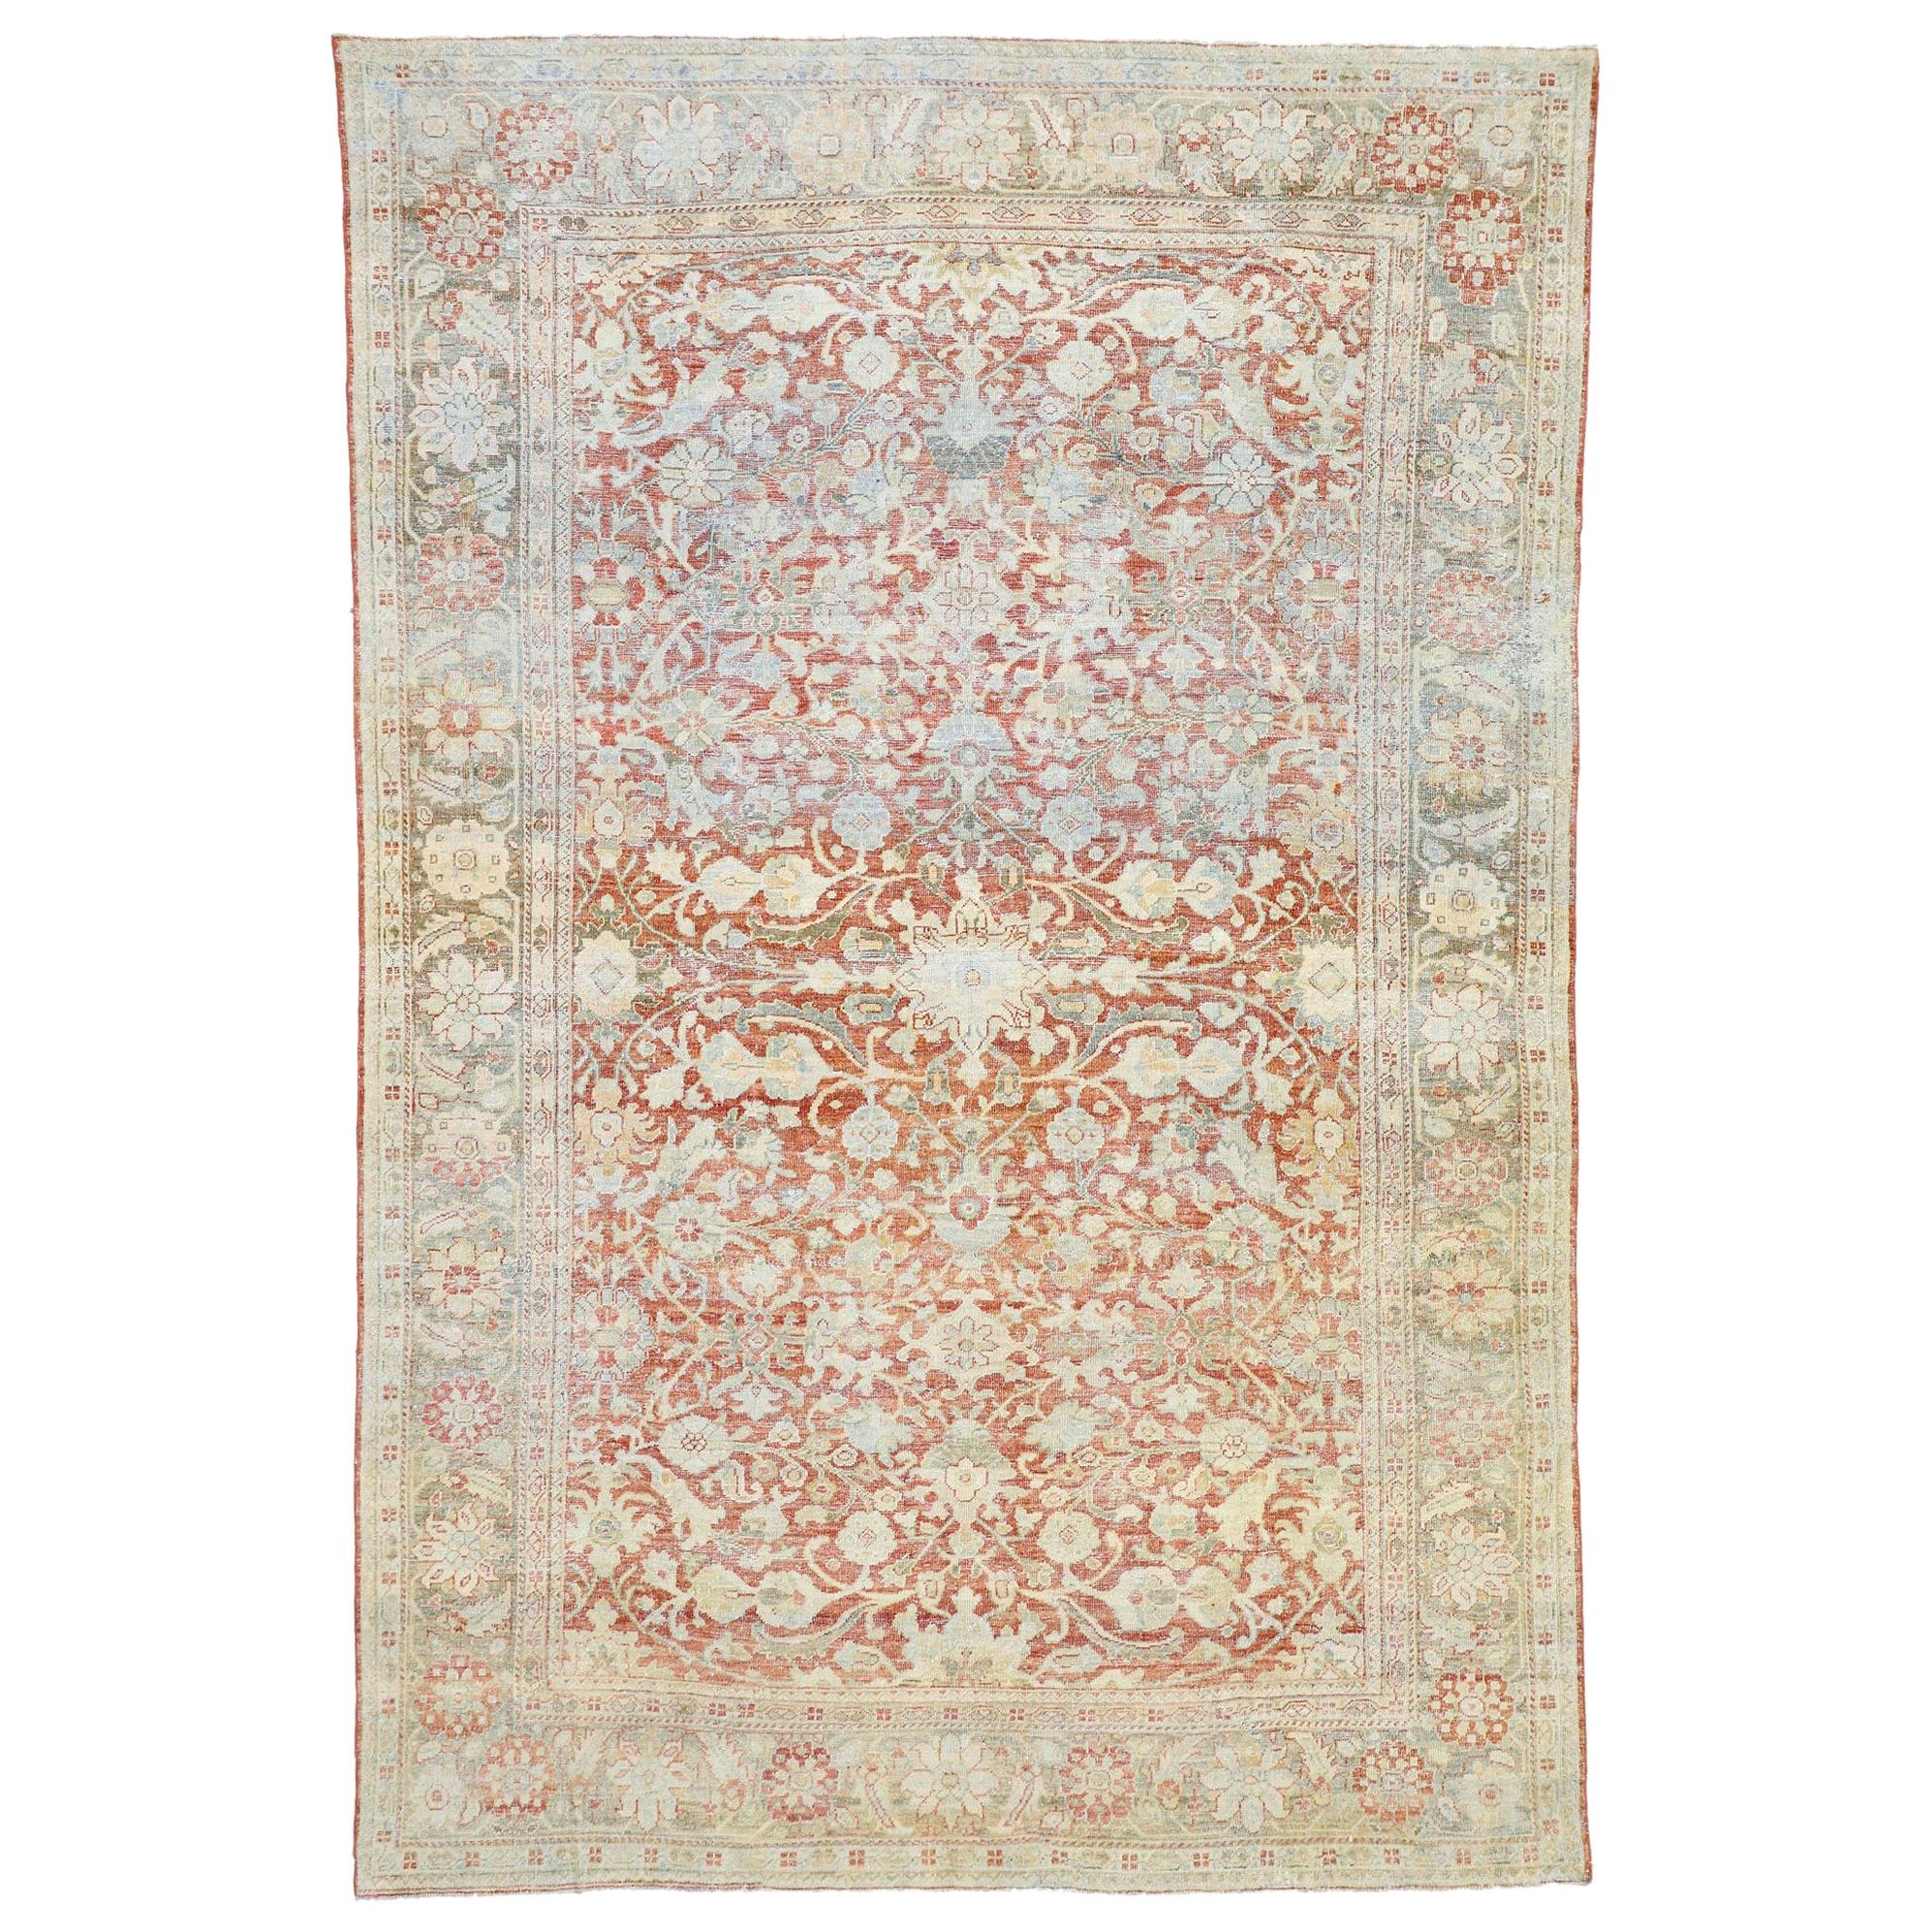 Distressed Antique Persian Mahal Design Rug with Relaxed Federal Style